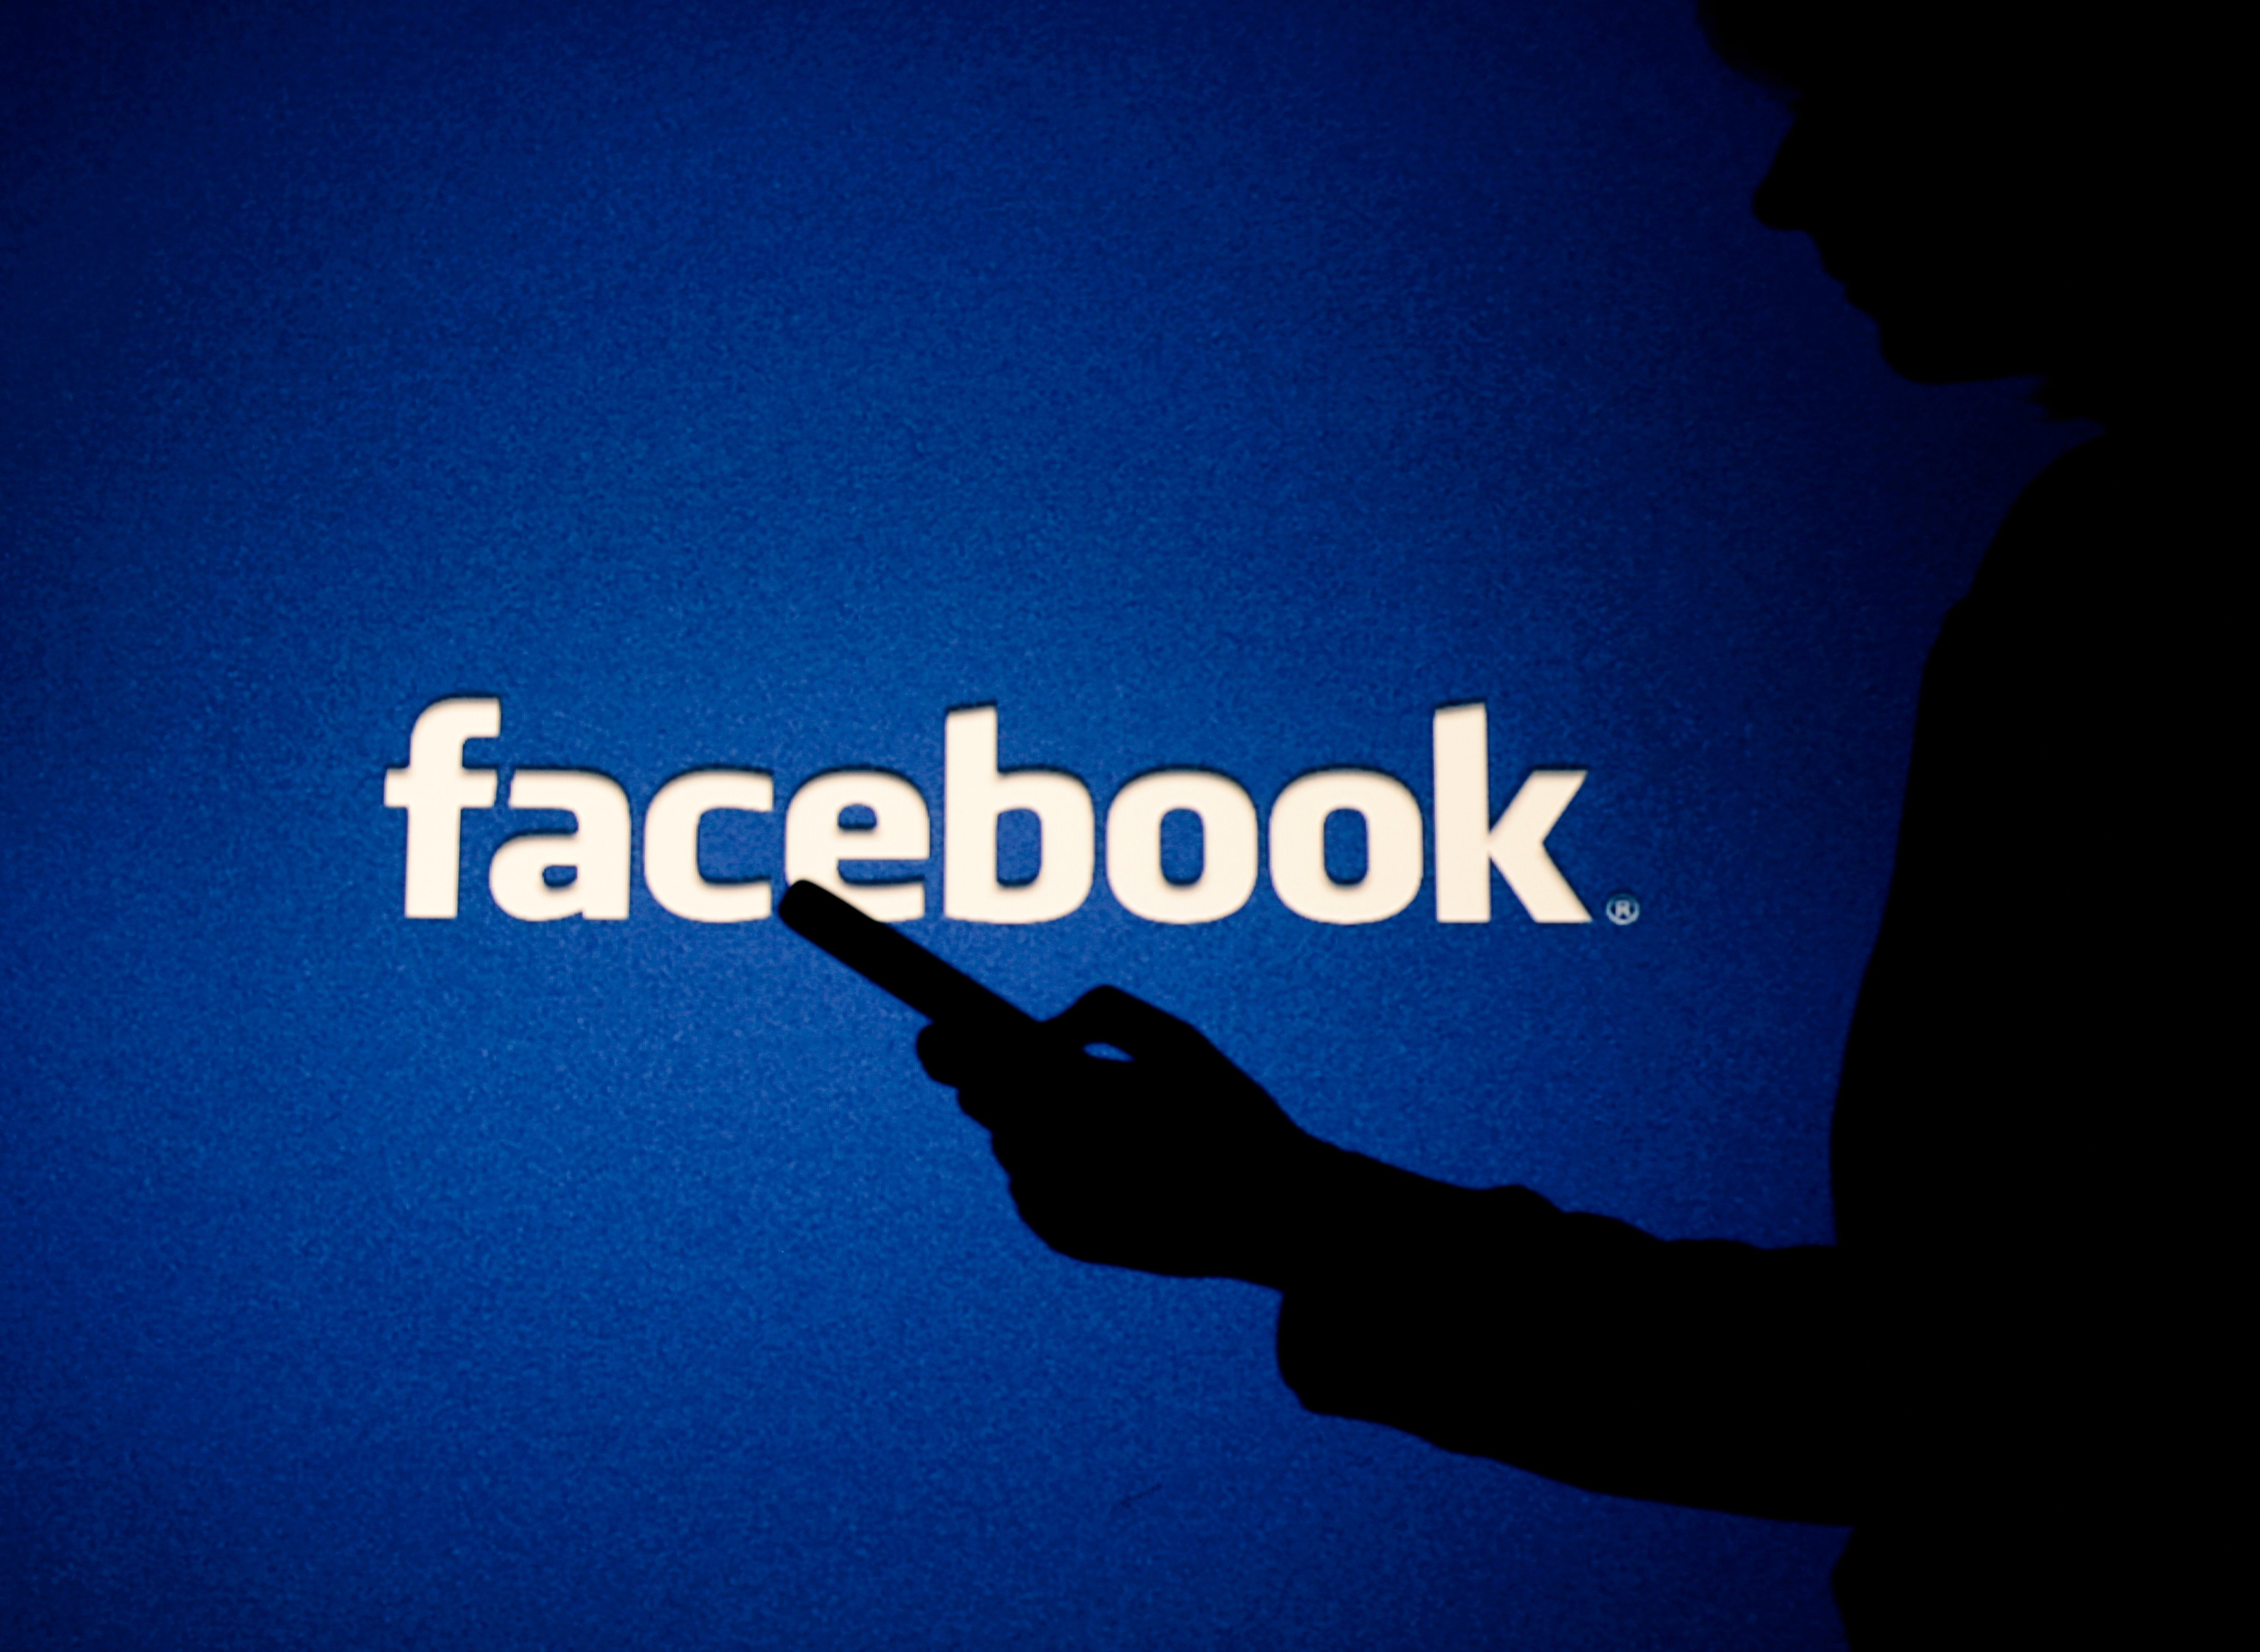 Facebook has seen an “unprecedented” spike in usage for many of its services, driven by demand for information and messaging during the coronavirus pandemic. Photo: Shutterstock